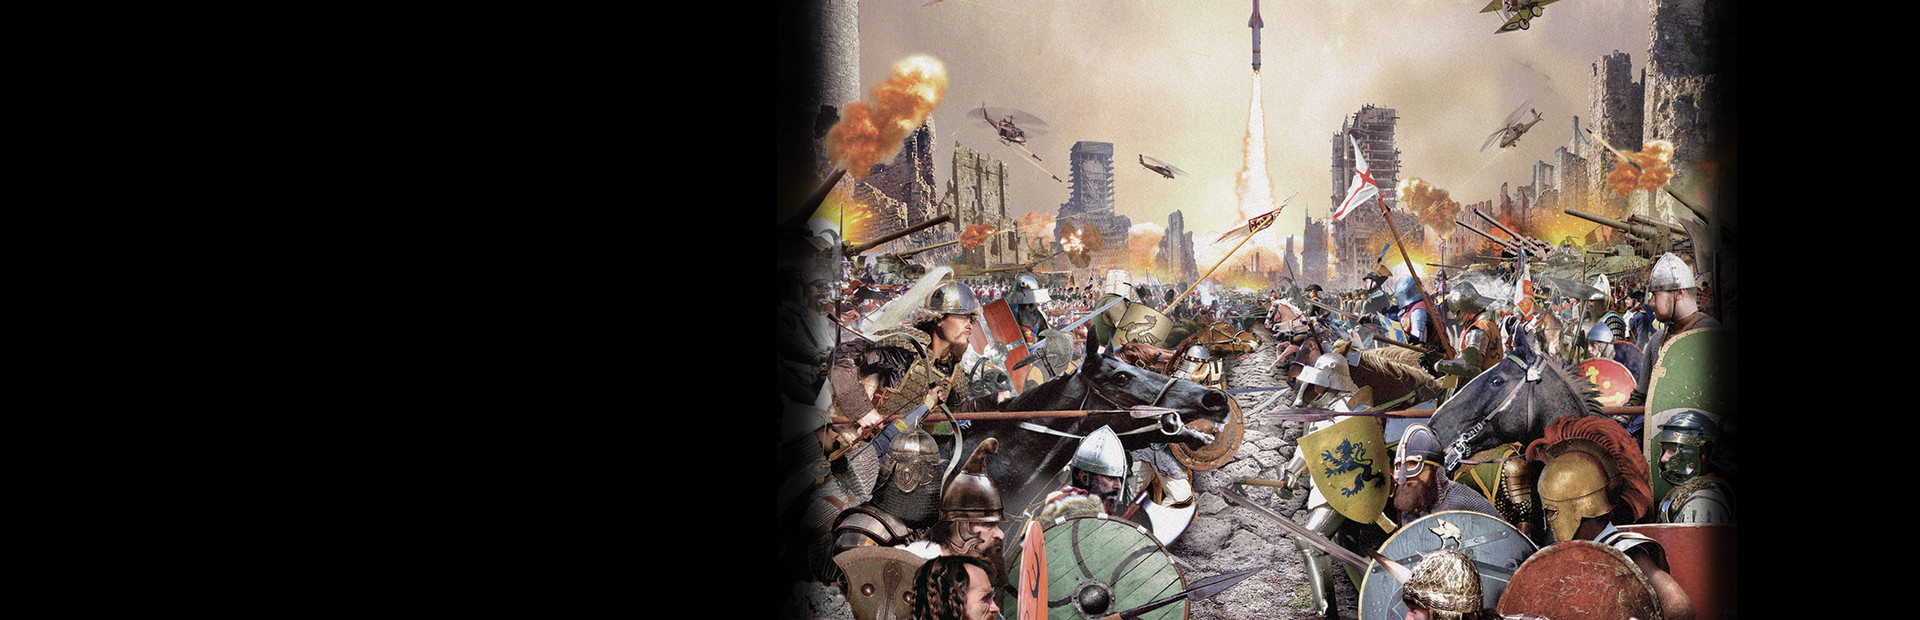 Civilization IV®: Warlords cover image